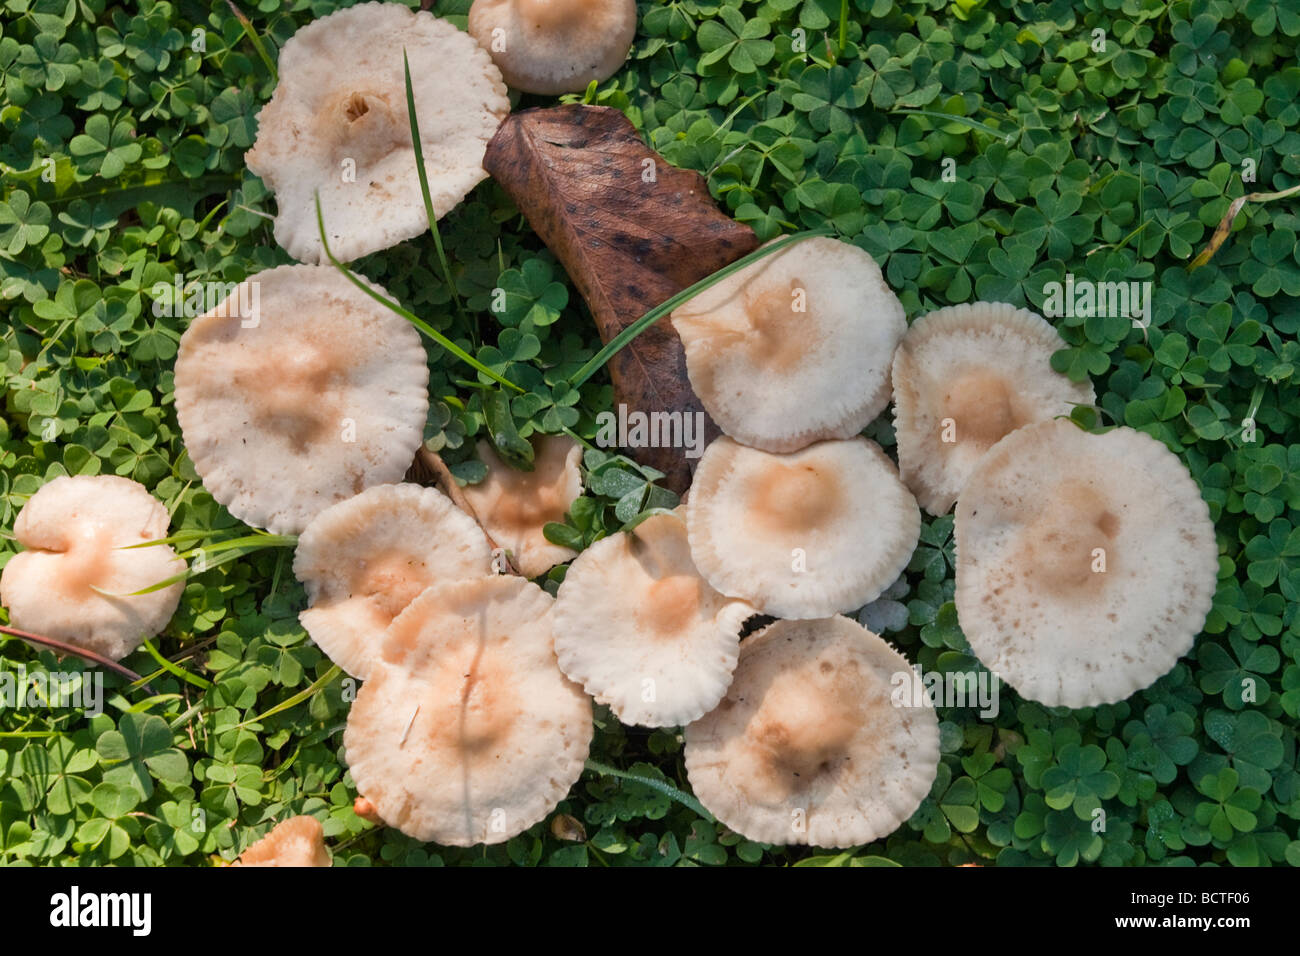 A cluster of mushrooms growing amongst a patch of green wild grass Stock Photo